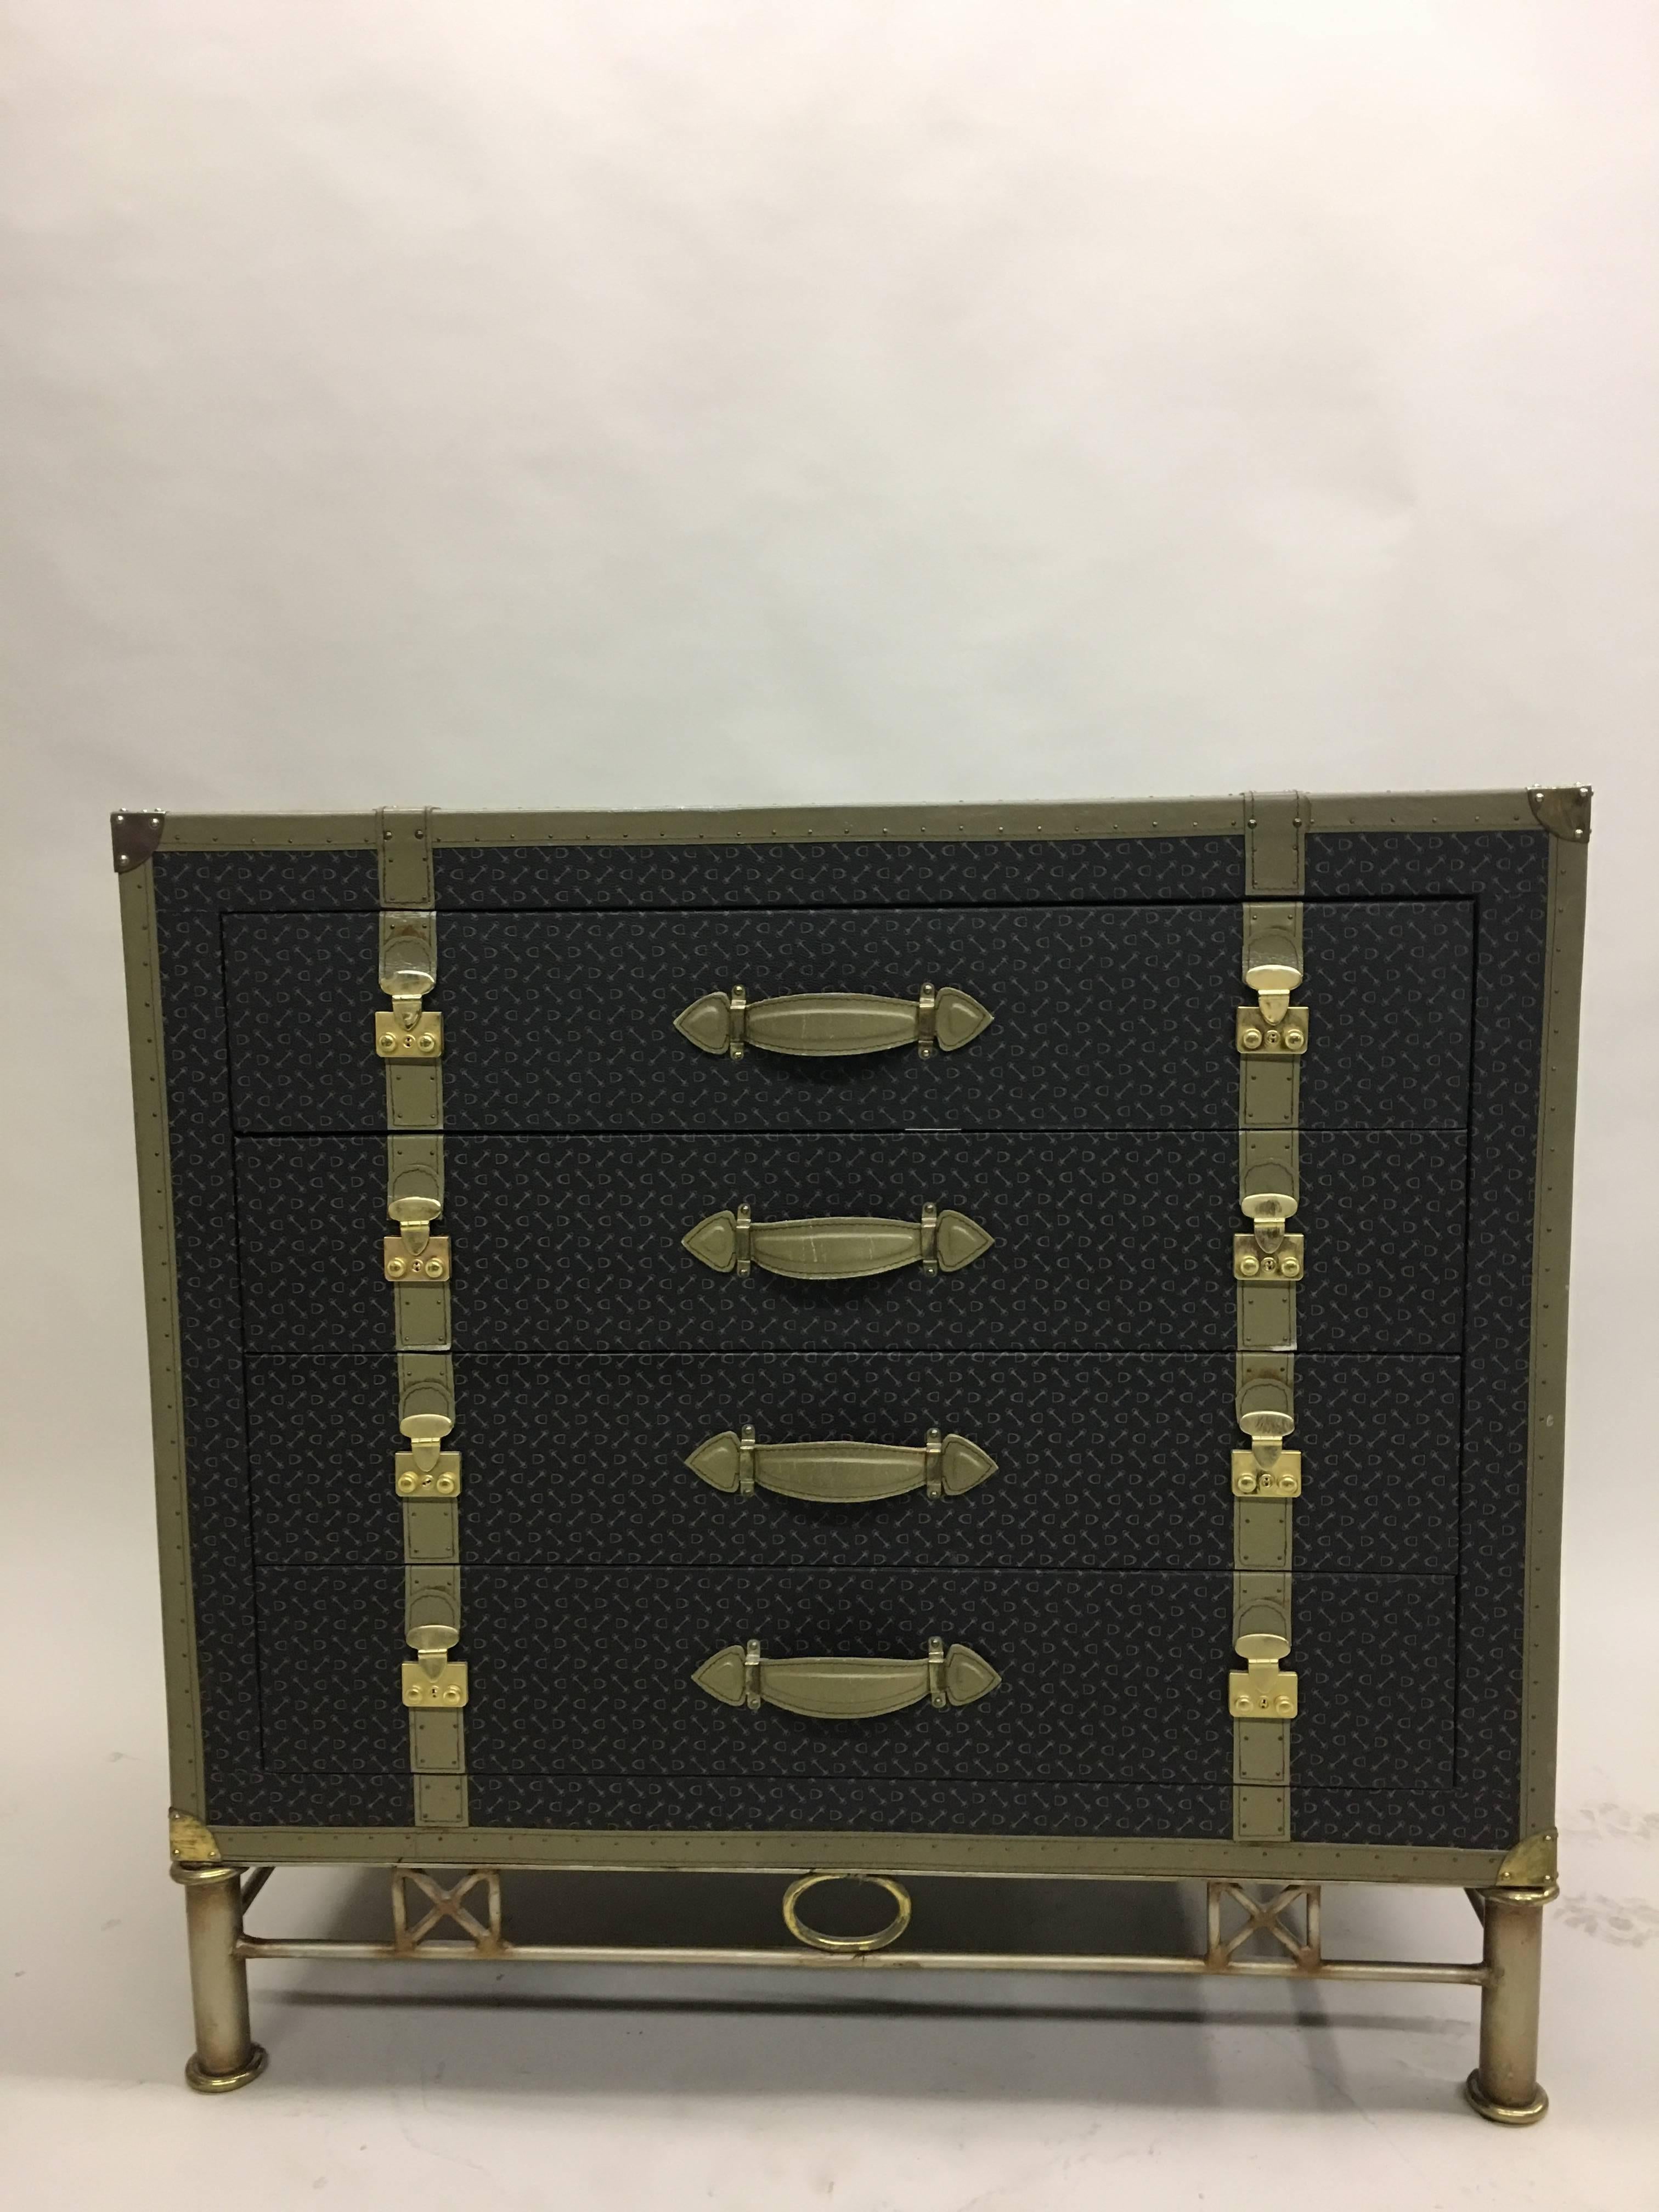 Elegant, Handsome French chest of drawers or commode in the style of a Louis Vuitton trunk with two drawers and one double door storage space.

The piece features all stitched leather handles and strapping, solid brass corner caps and a bonded